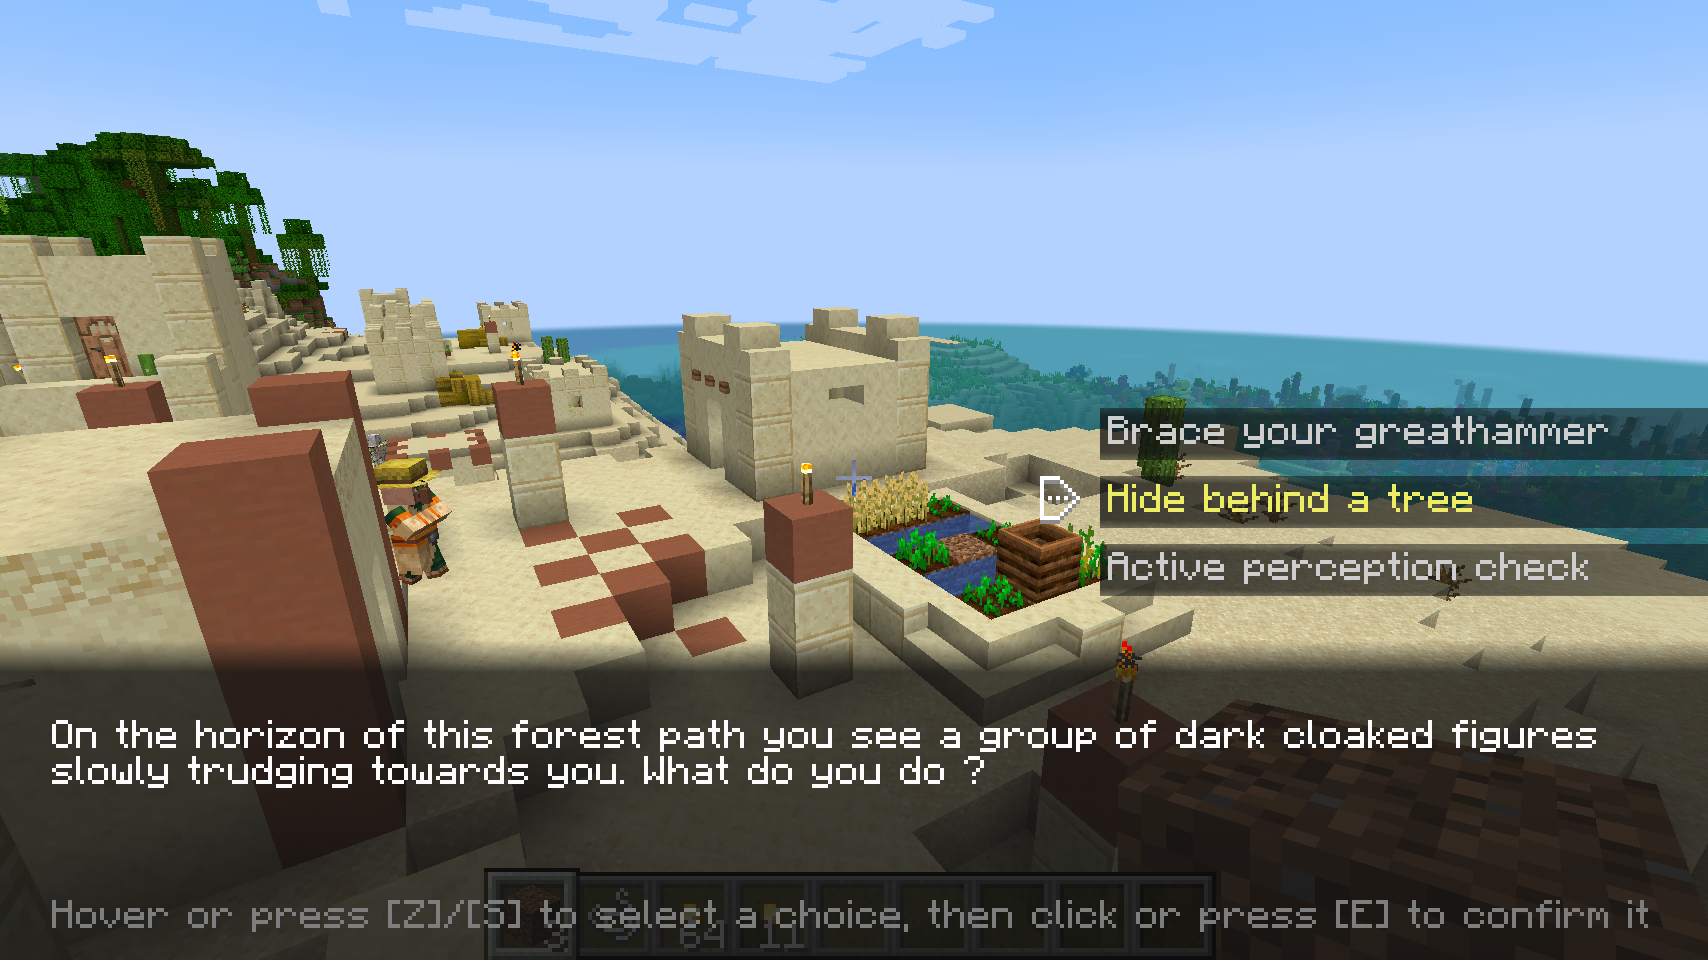 A dialogue using the RPG alternative layout, with 3 choices